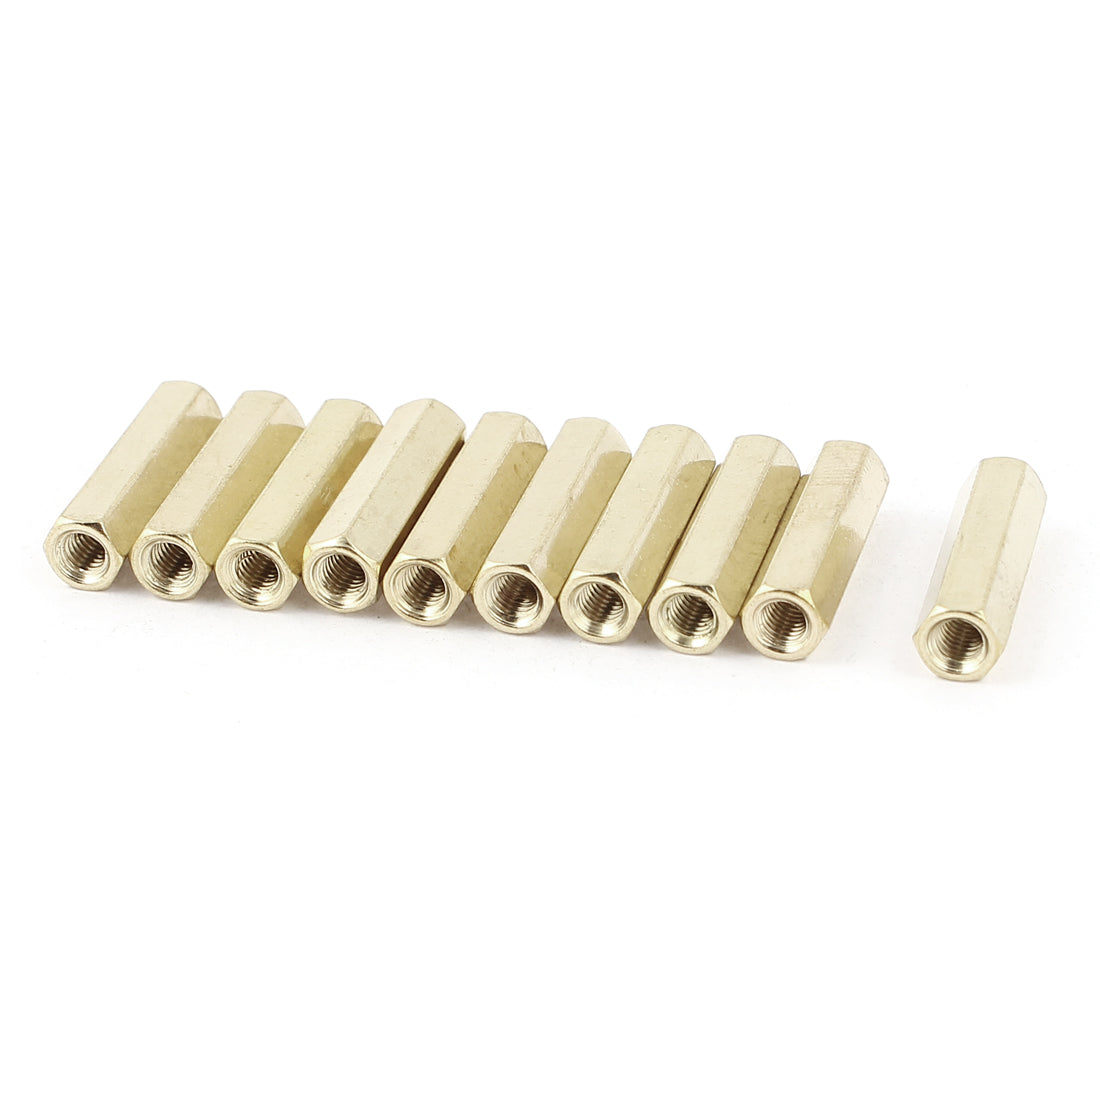 uxcell Uxcell M3 x 18mm Female/Female Thread Brass Hex Standoff PCB Pillar Spacer 10pcs